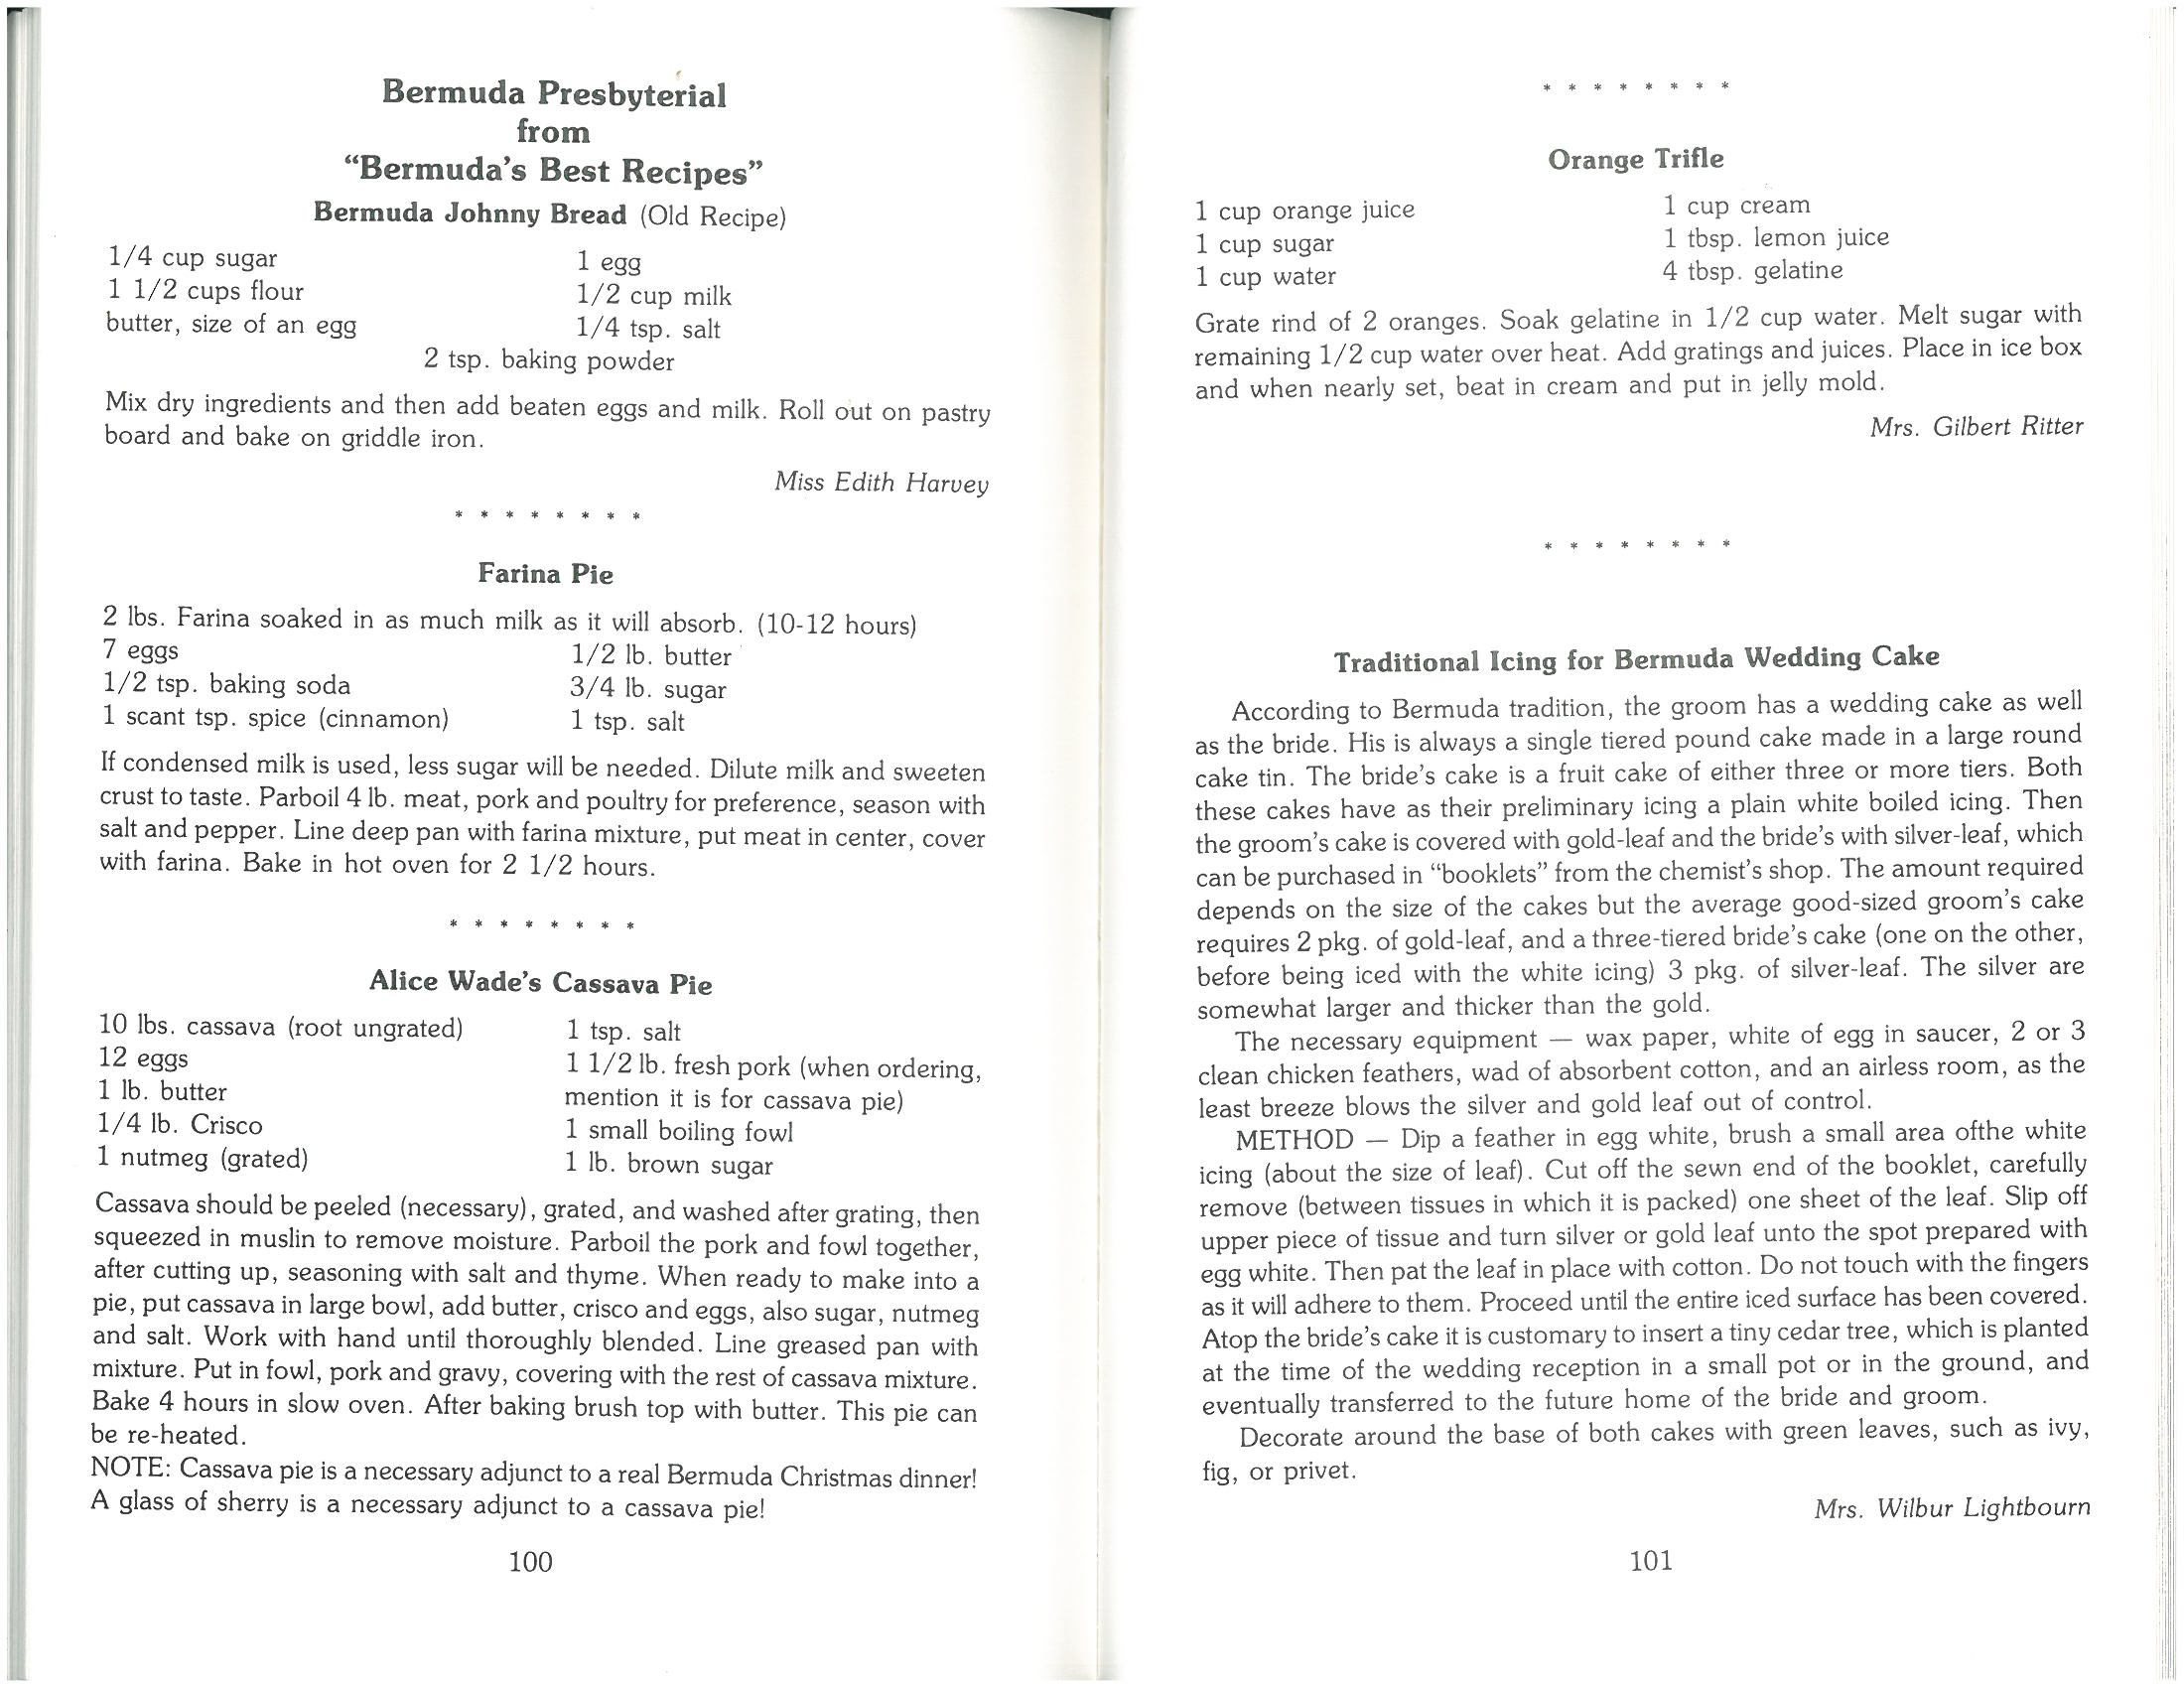 Archives Recipe of the Month-The Bermuda Edition